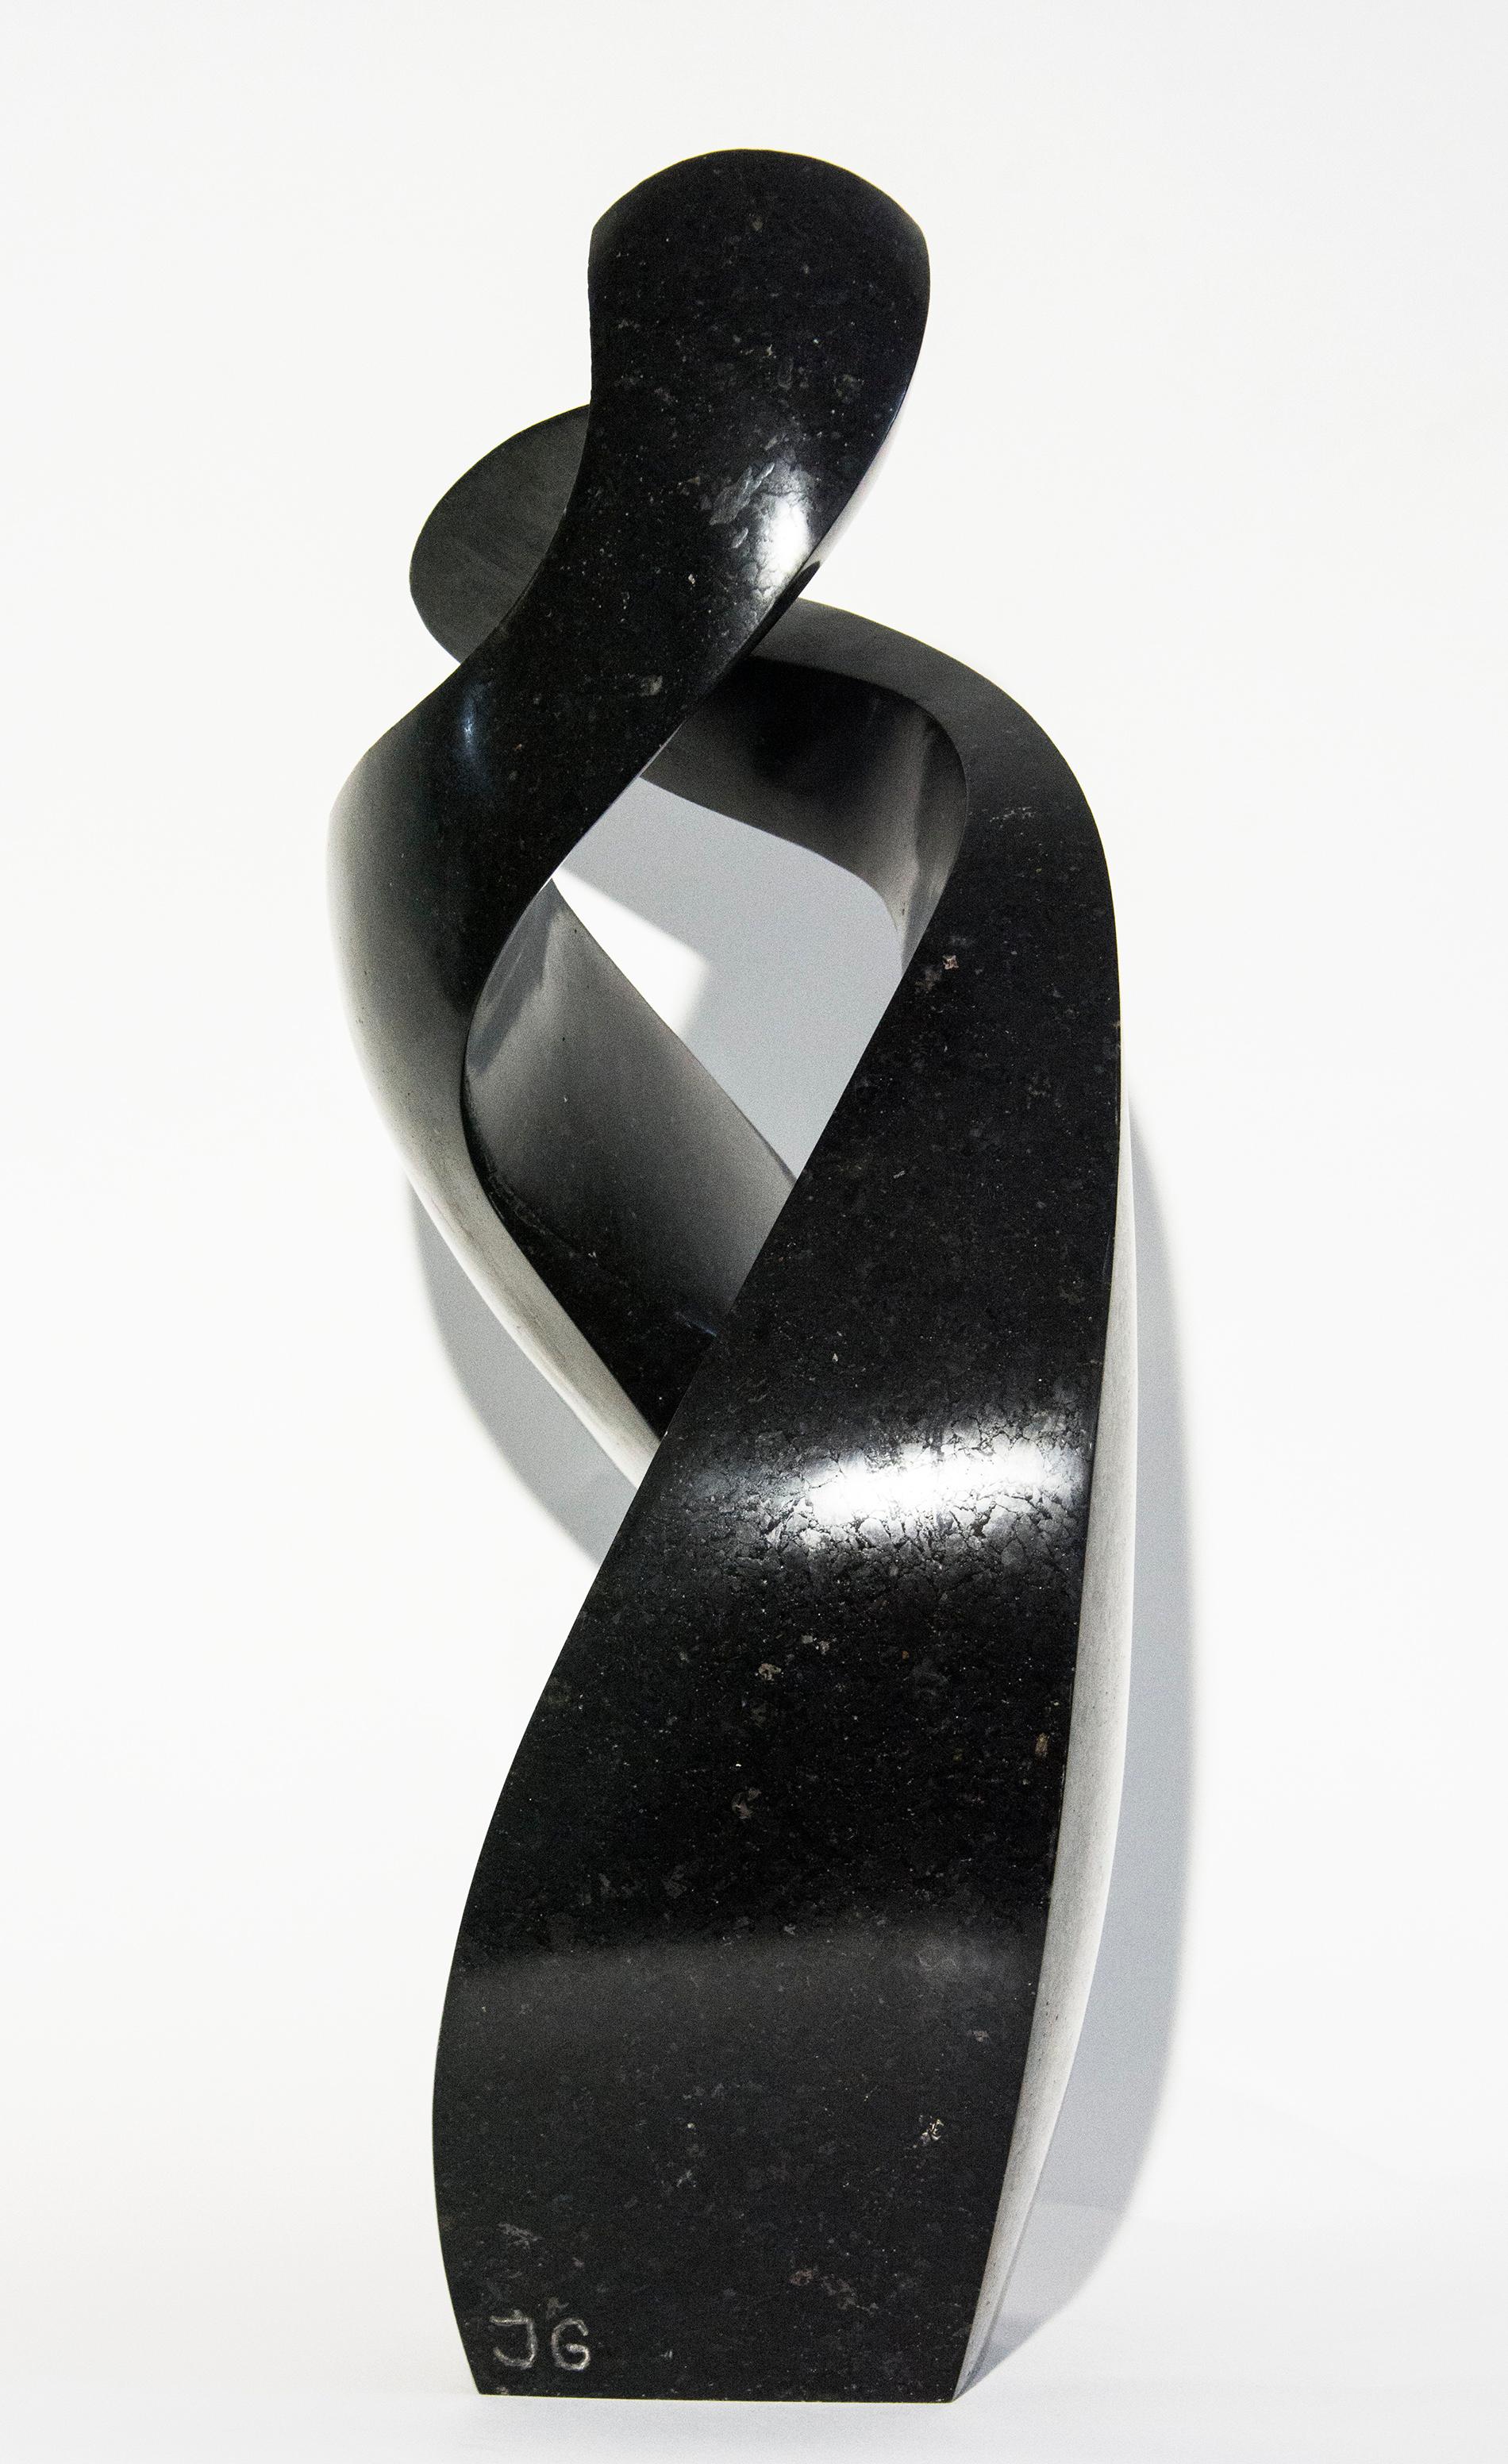 Jeremy Guy has created a poetic, unwinding representation of a classic theme in this engineered granite sculpture. The sculpture does not require a base although a plinth can be created in the same or different material, fee will apply. This work is